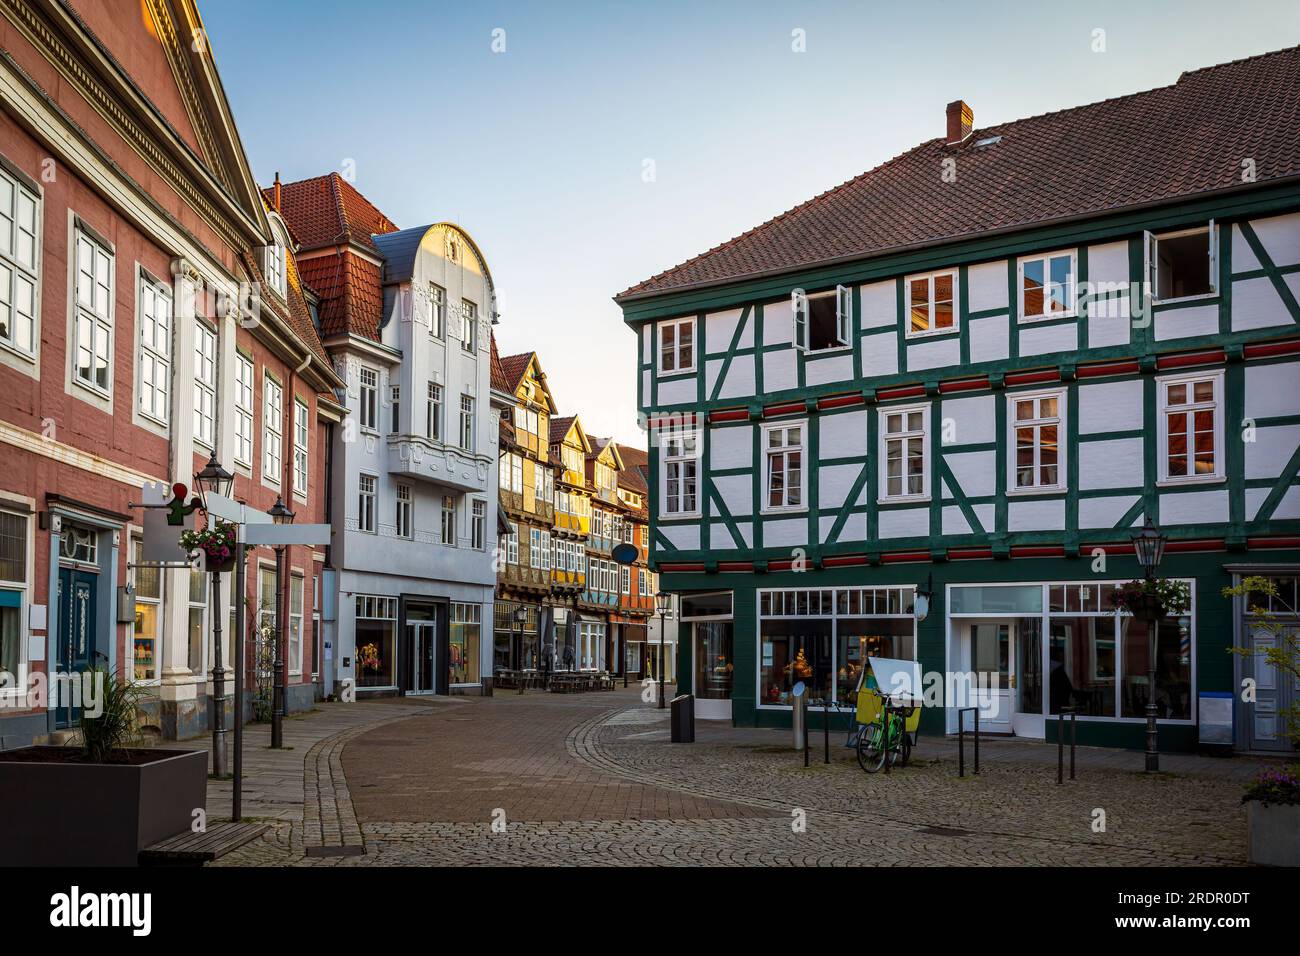 The medieval town of Celle with timber-framed houses front. Photo taken on 4th of June 2023, in Celle, Lower Saxony, Germany. Stock Photo